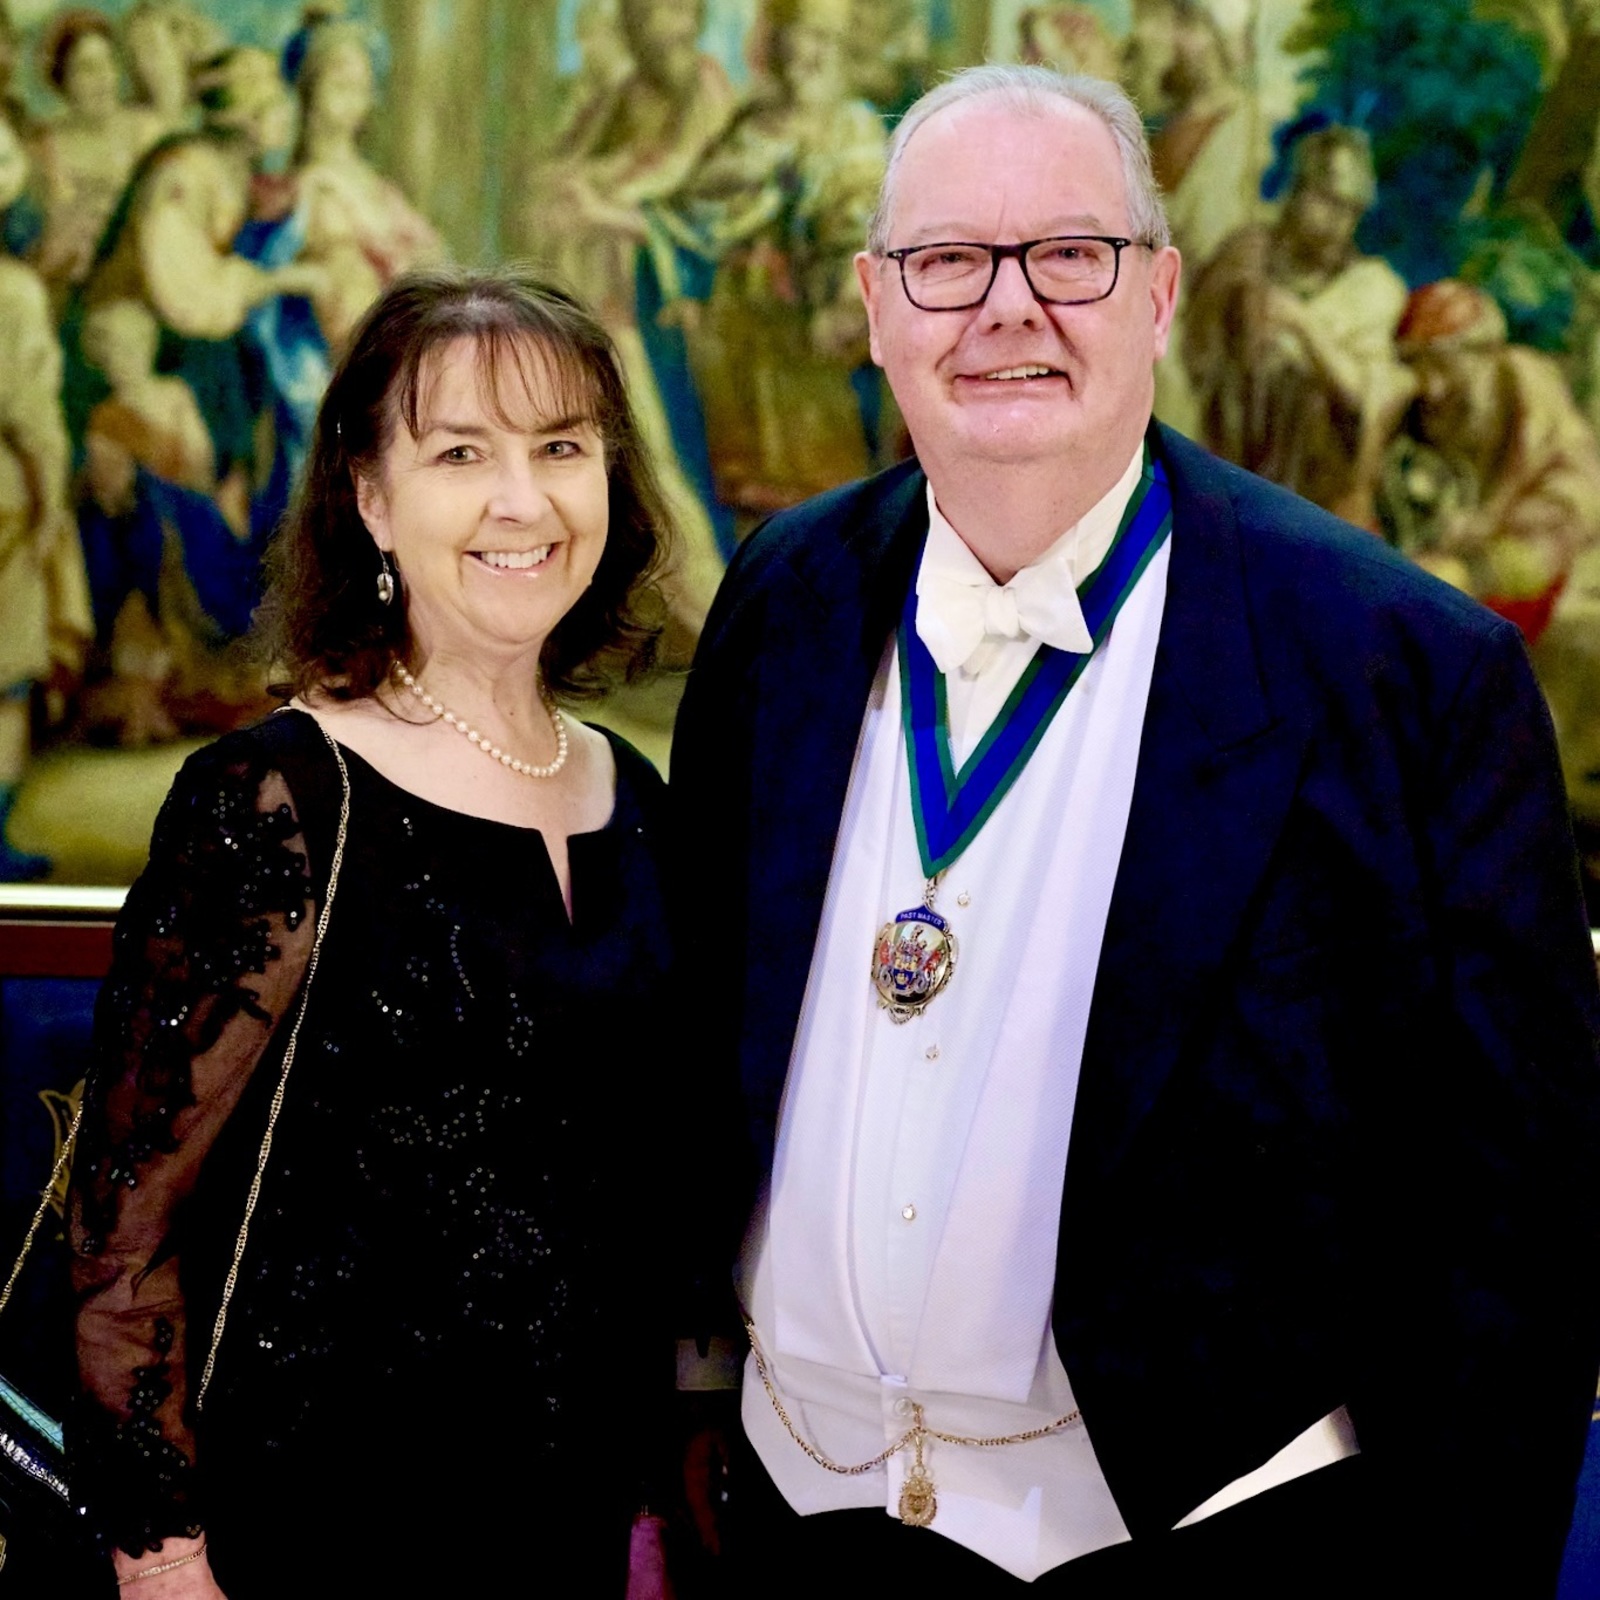 At the  Marketors' Installation Dinner hosted at Clothworkers Hall